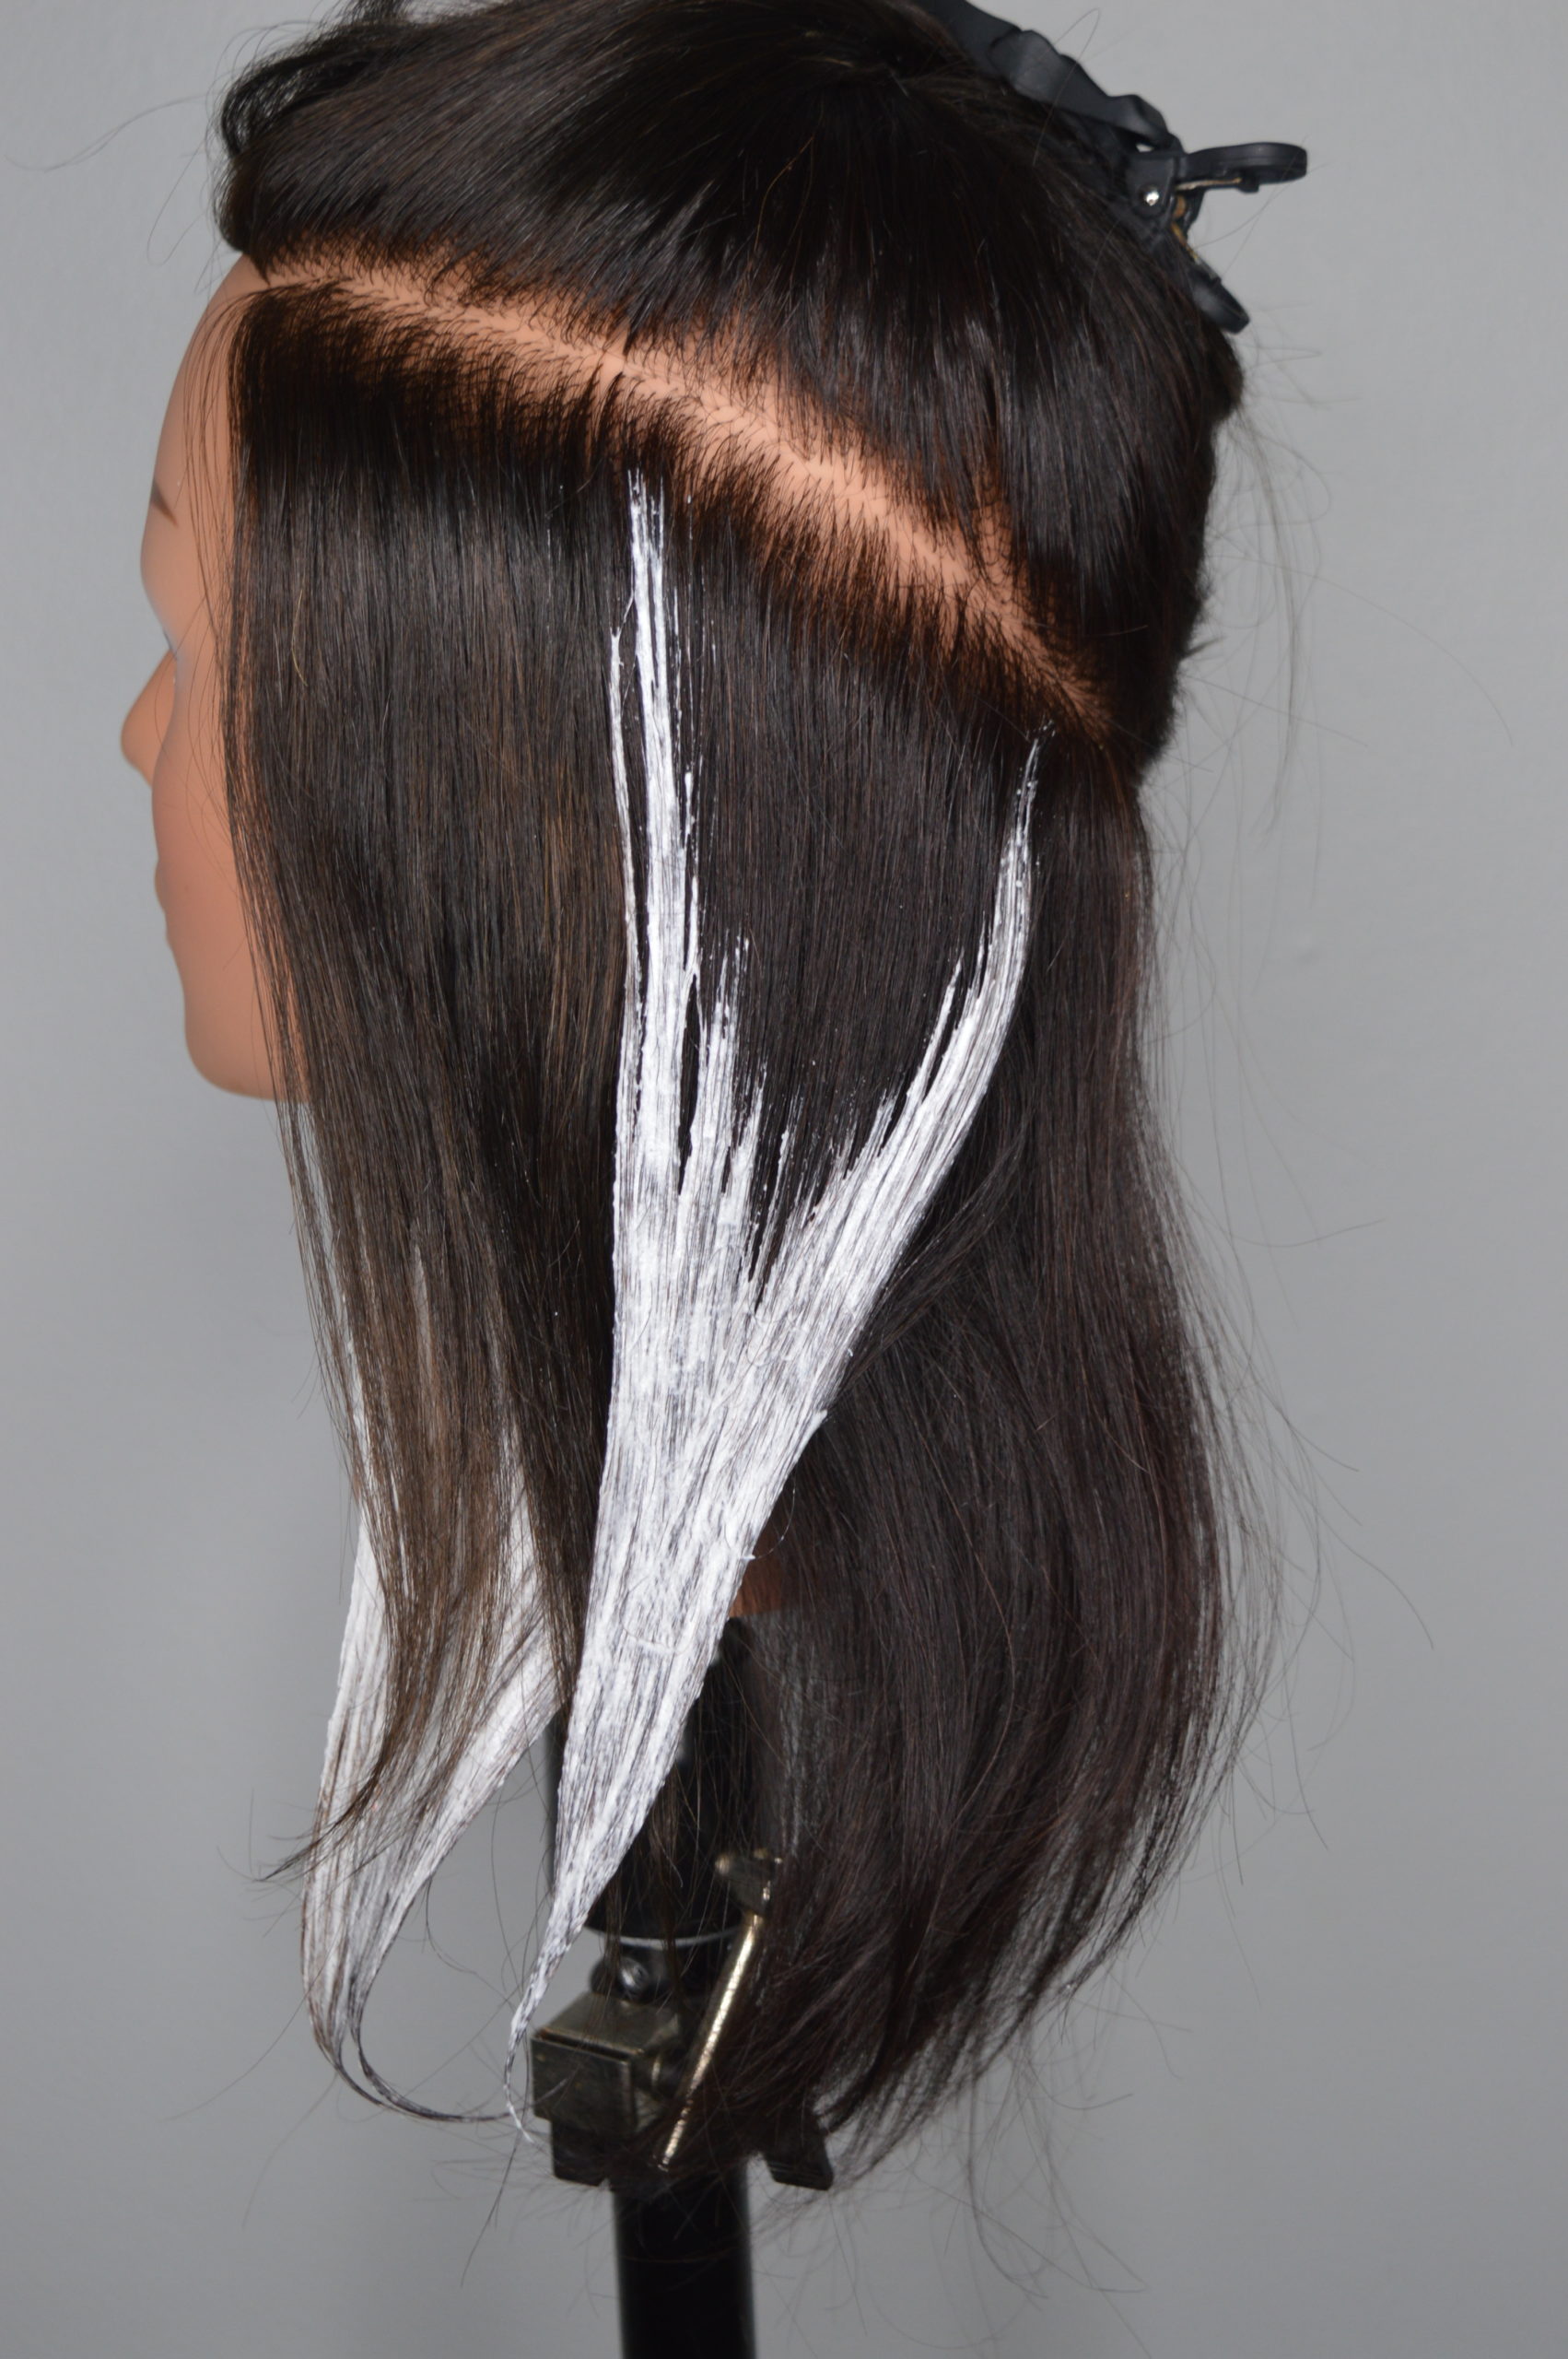 Lightener is applied to a section of hair to form a V shape.